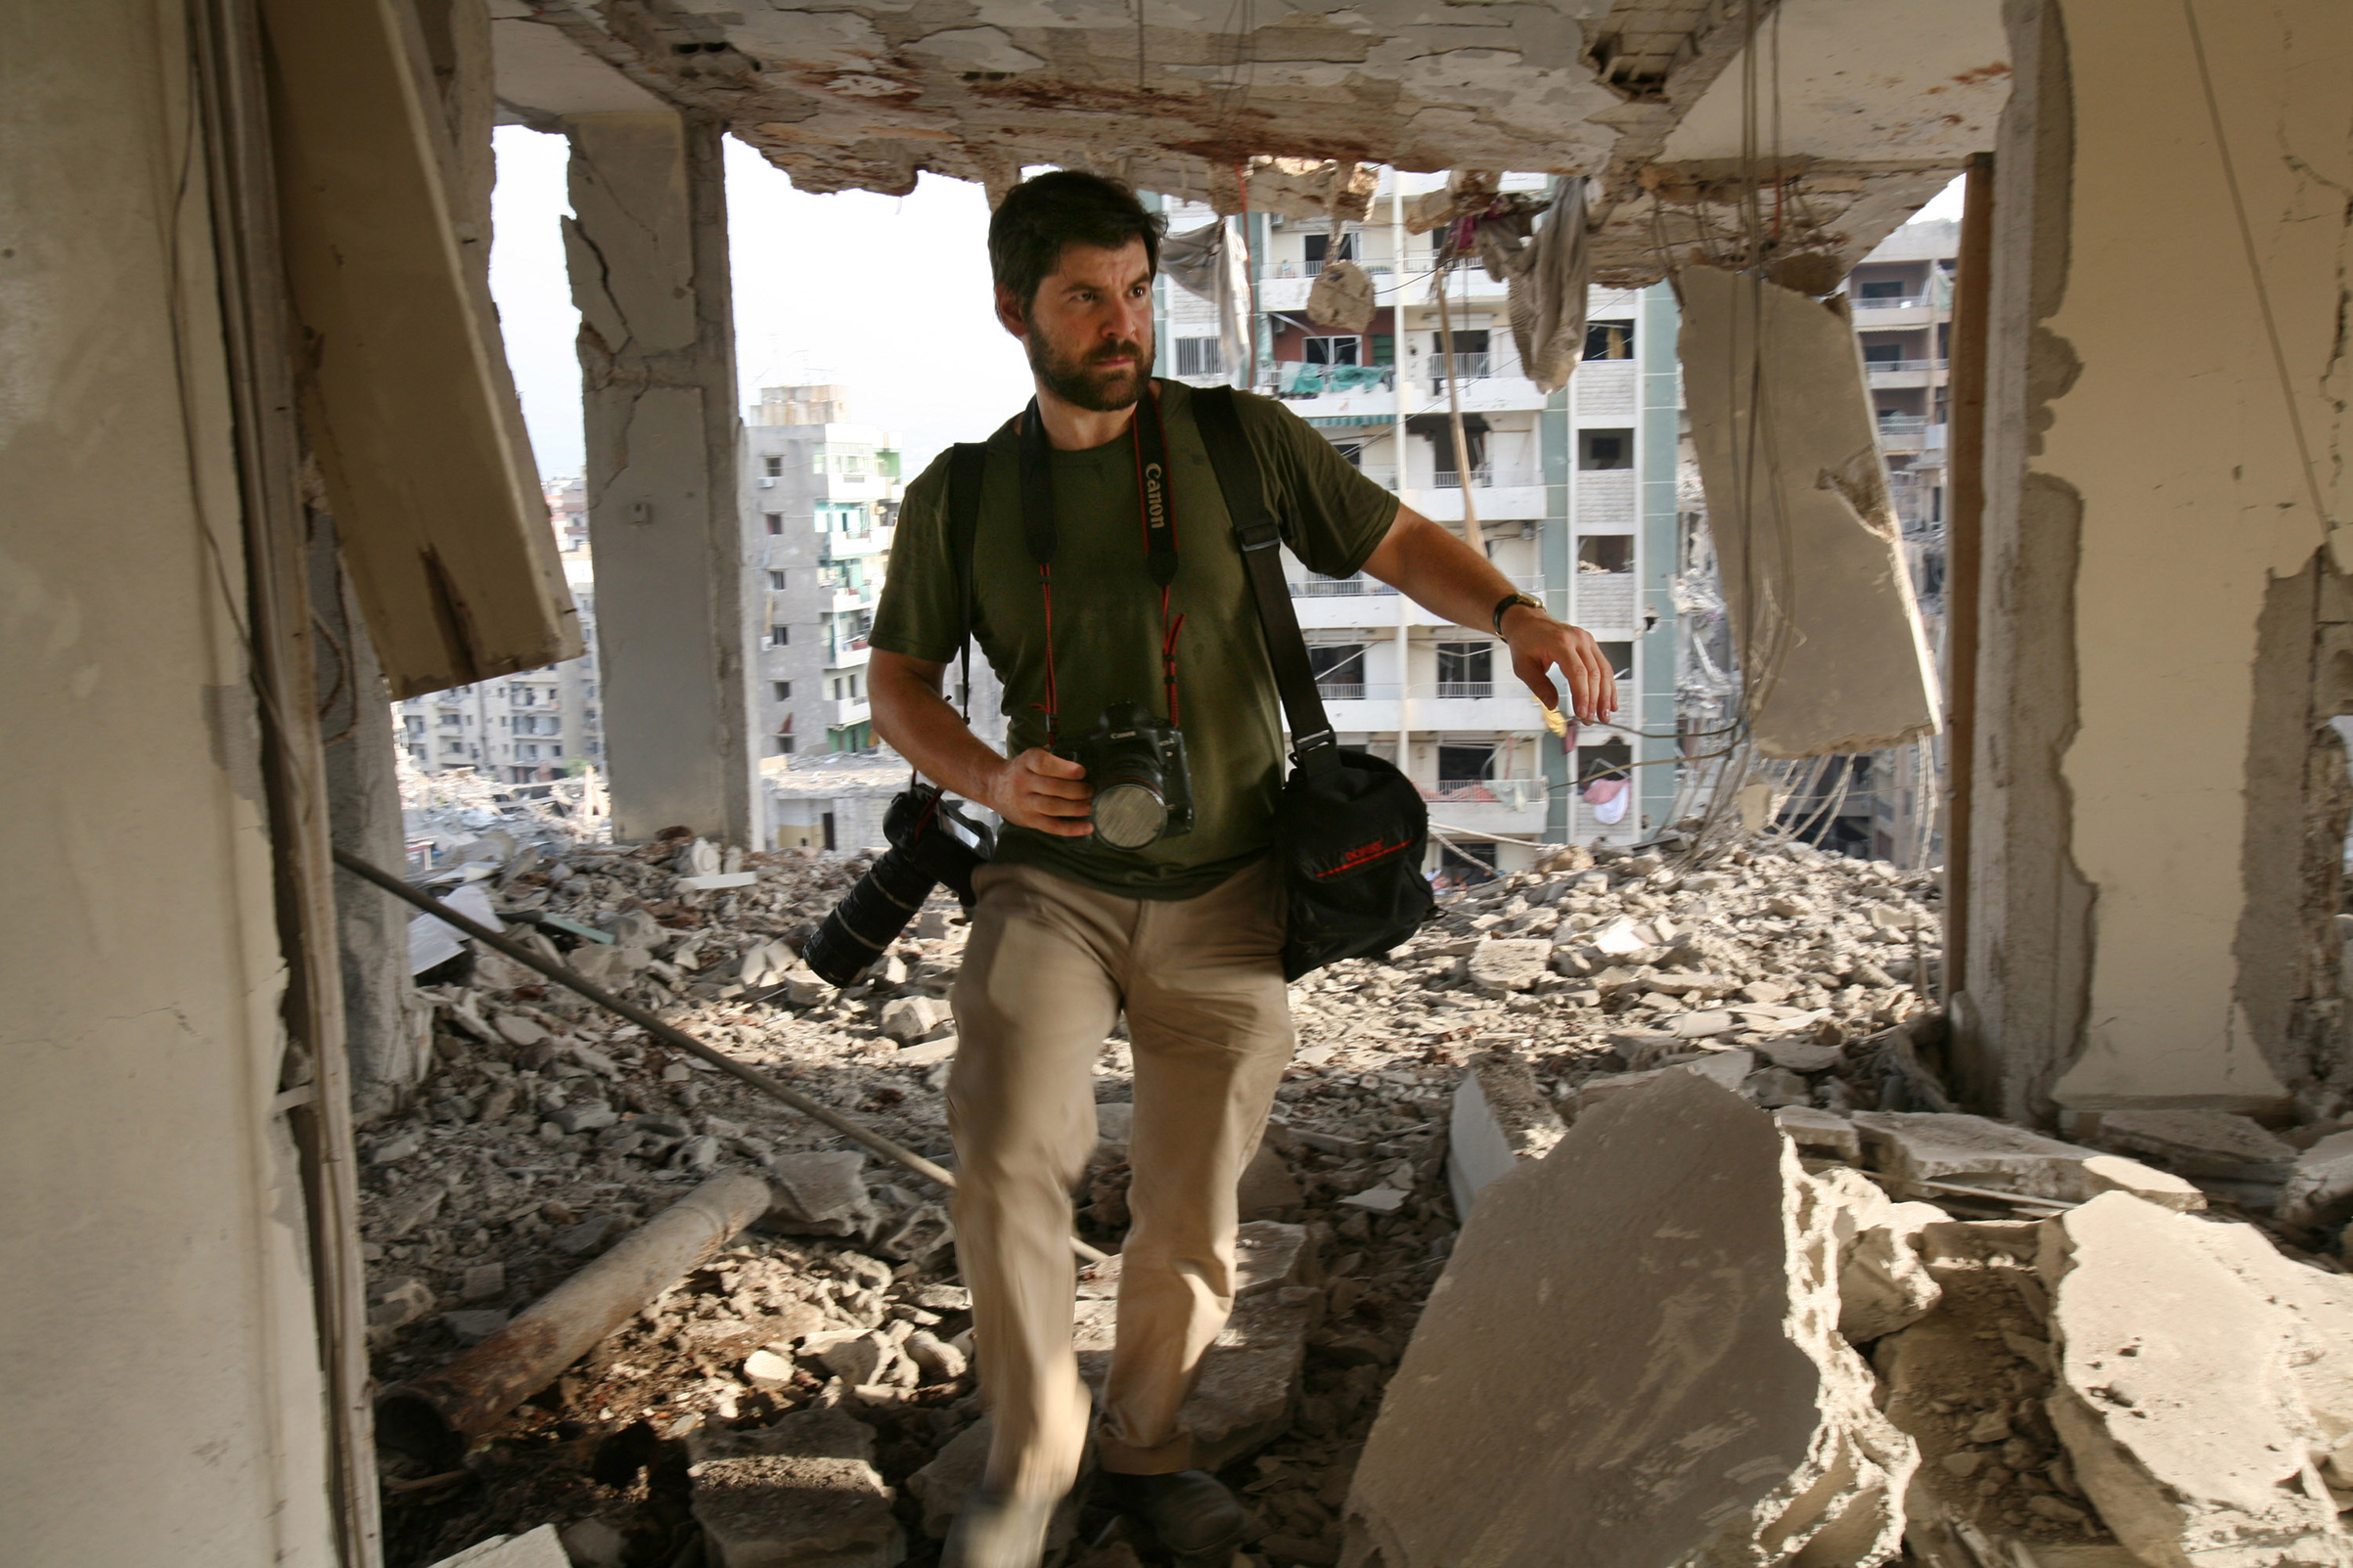 Getty Images photographer Chris Hondros walks through the ruins of a building in southern Beirut on Aug. 21, 2006. Hondros was killed while on assignment in Misrata, Libya, on April 20, 2011. (Getty Images)